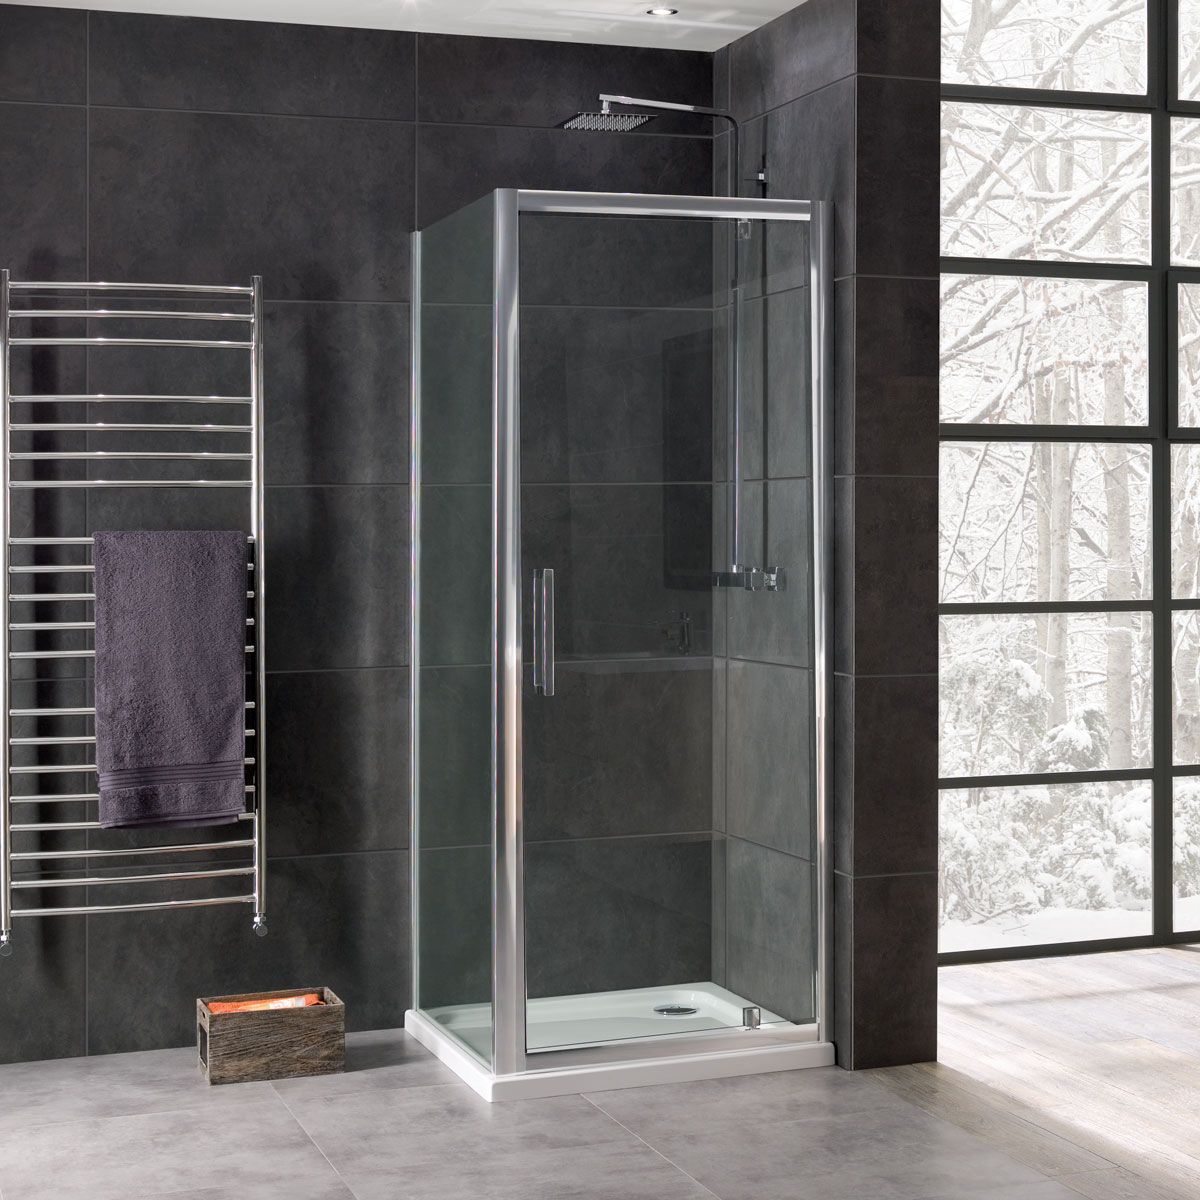 Rectangular 1600 x 900mm Shower Tray Pearlstone for Shower Enclosure Cubicle with Waste Trap